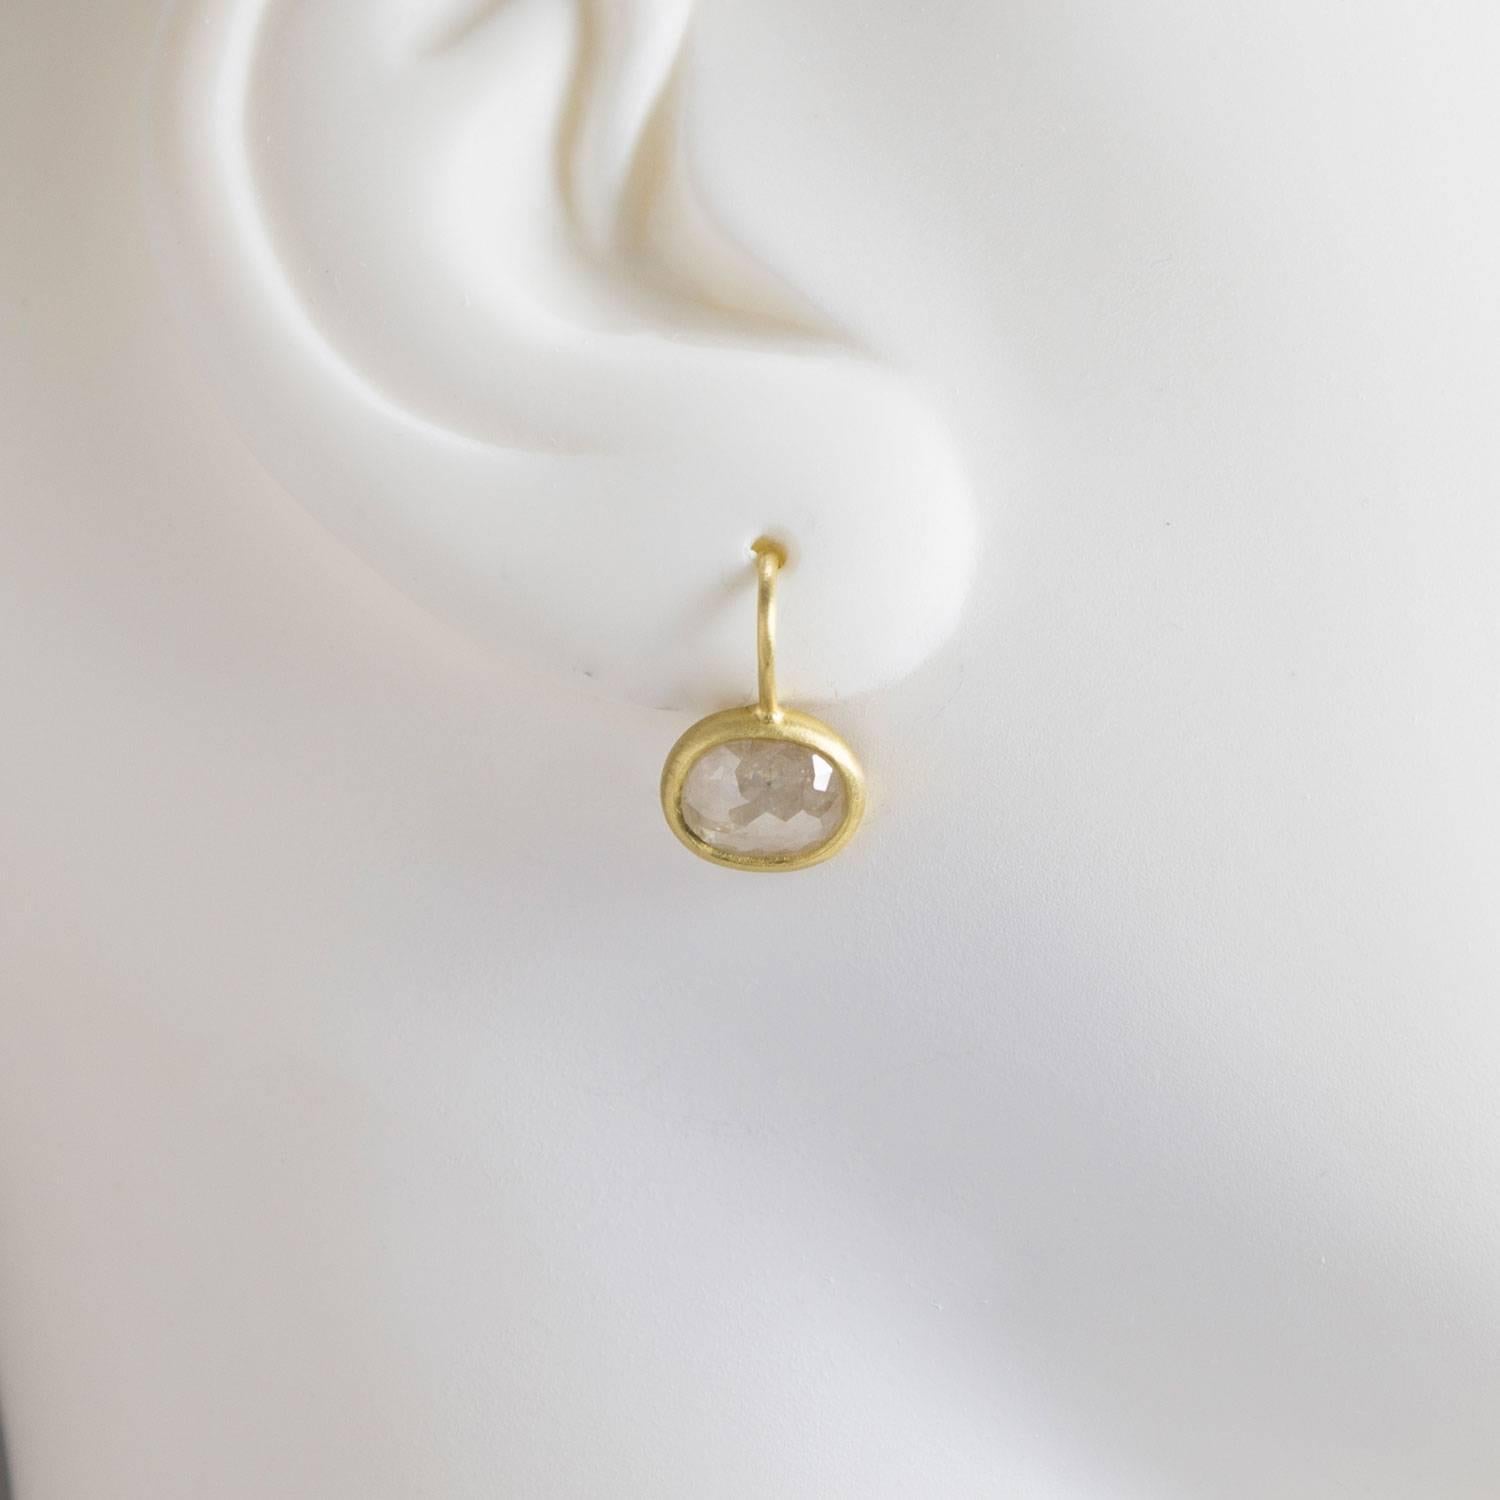 Milky diamonds set in 18k green* gold.  The simplicity of the gold bezel with ear wire make this earring so fresh and modern.  Cool, casual and distinctive, these diamond drop earrings are the perfect go to earrings!  Diamond weight is 3.13 carats. 